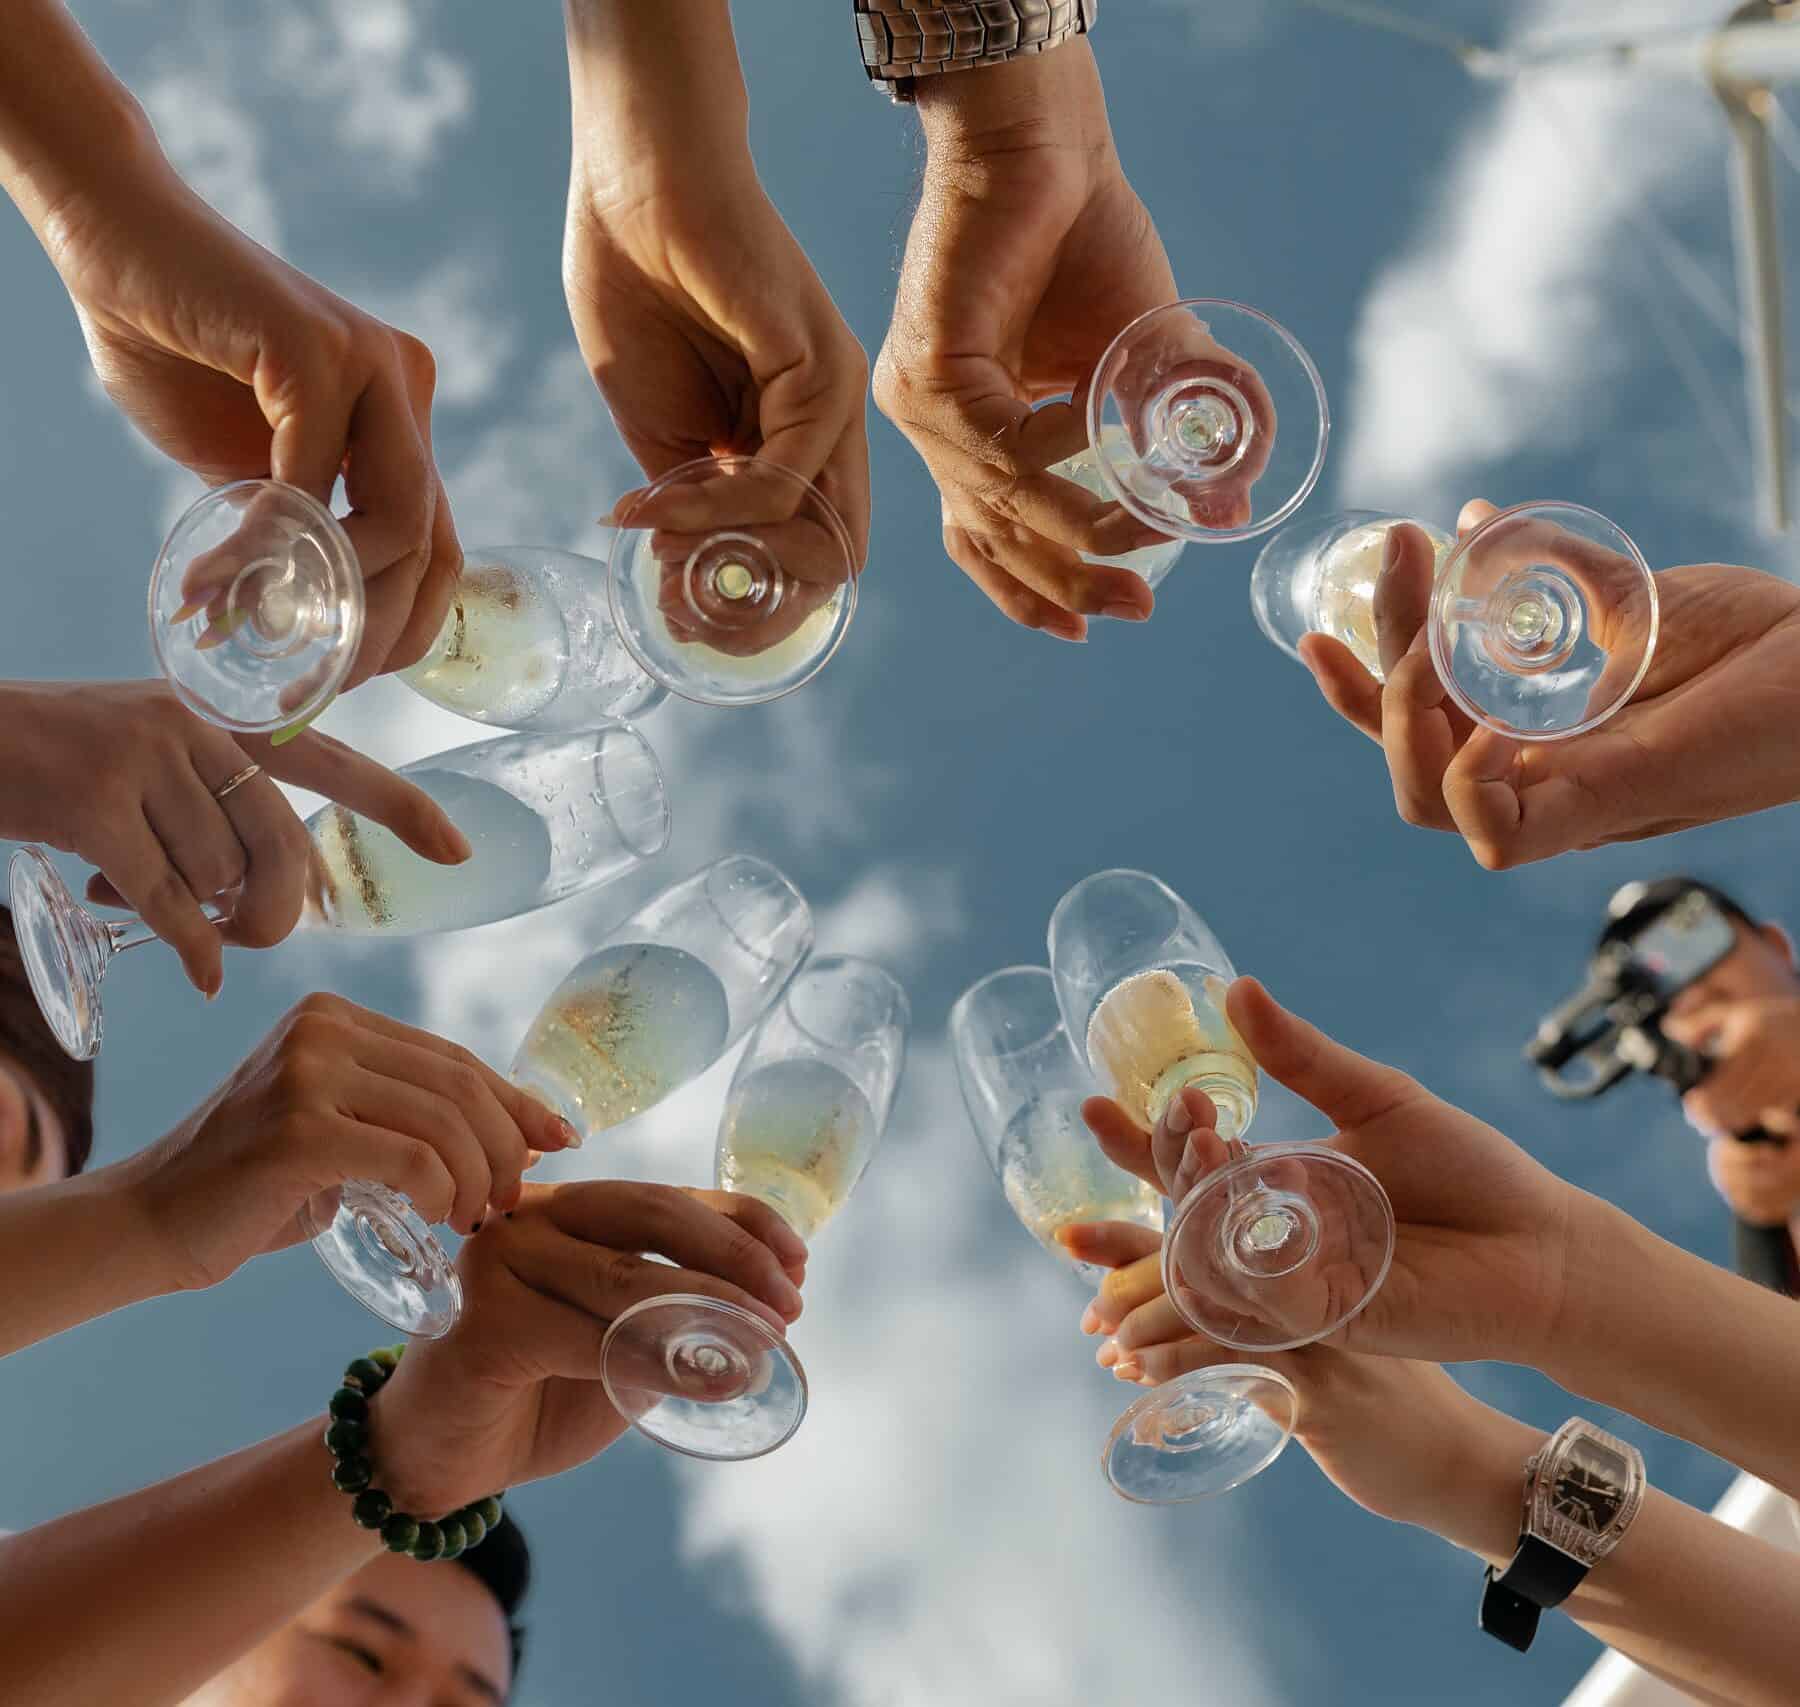 picture from a downwards angle looking up at the sky. A circle of women holding glasses of champagne in their hands